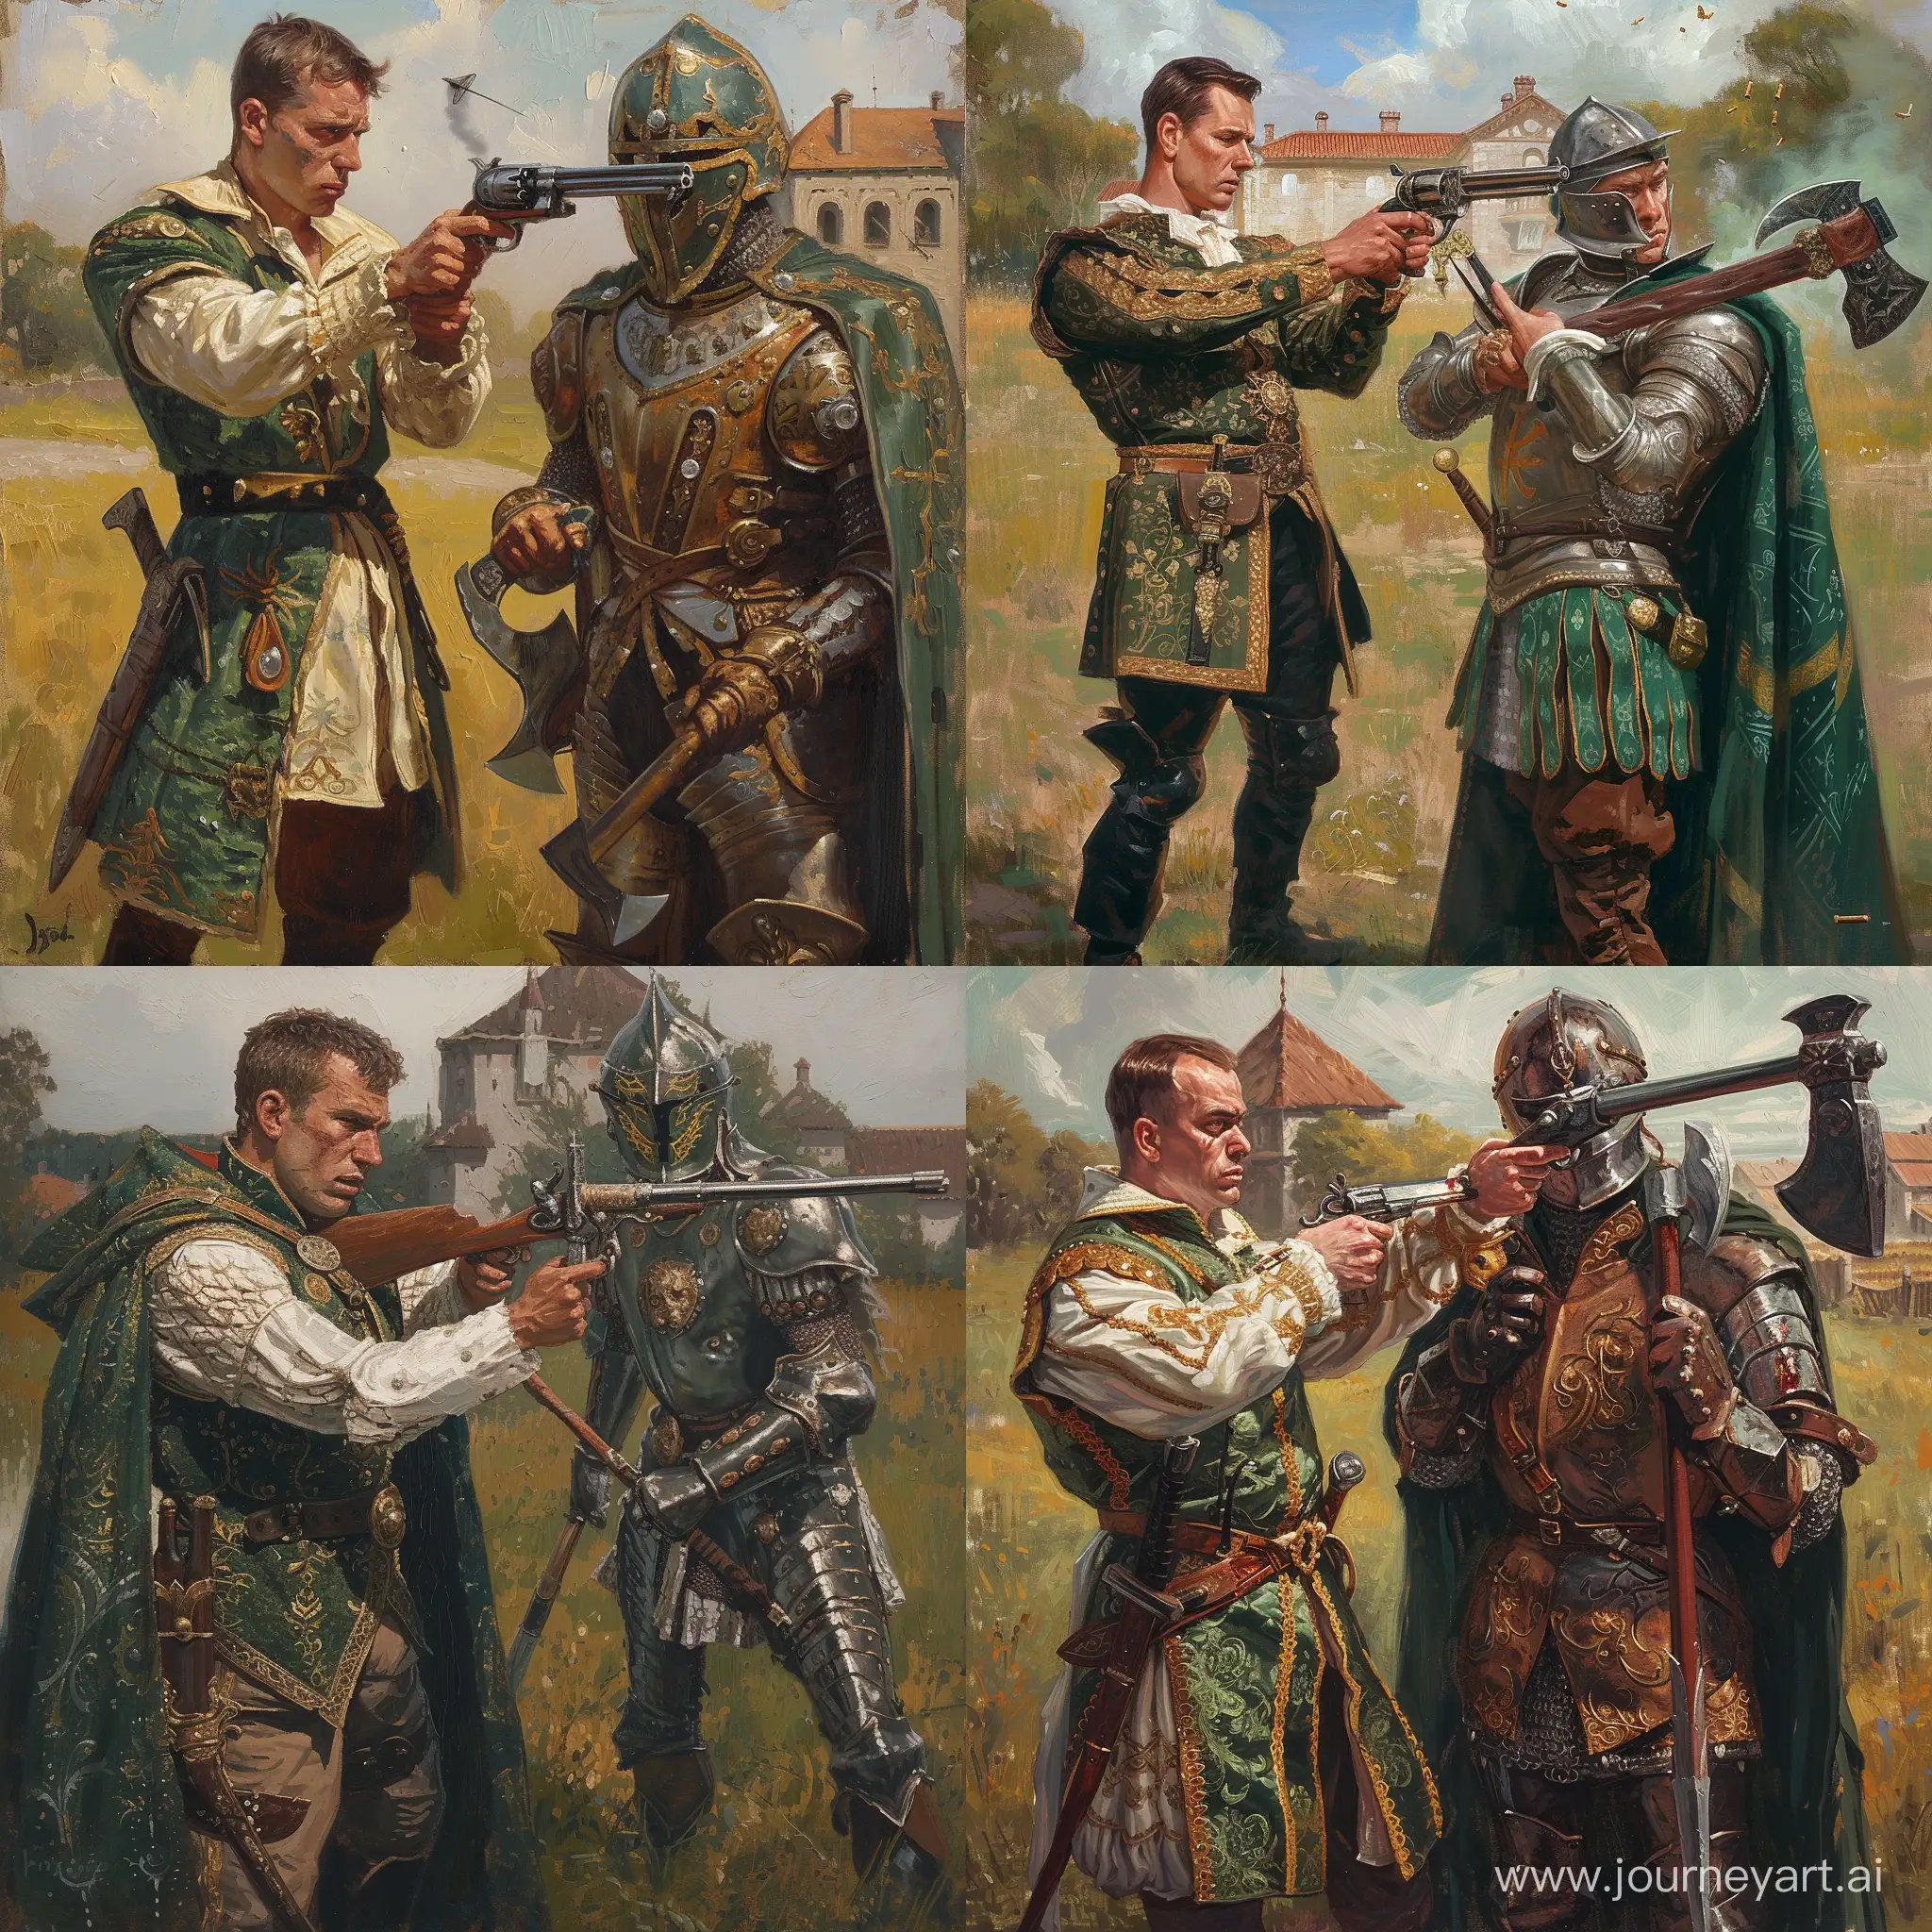 illustration, fantasy, the painting is made with oil paints and a brush, large brush strokes are applied to the painting, the painting depicts a merchant in aristocratic clothes, a merchant - a 26-year-old guy with a slender medium build and short hair, he holds a medieval pistol in his hands and aims at a target, a knight with a battle axe stands next to a merchant, a knight is dressed in armor with green cloth with engravings, a knight's cuirass is inlaid with magic crystals, a knight's helmet resembles a bascinet with a Roman visor, a merchant and a knight stand in a field, and in the background you can see the merchant's estate in a slightly shabby form, the knight's face is covered with a helmet